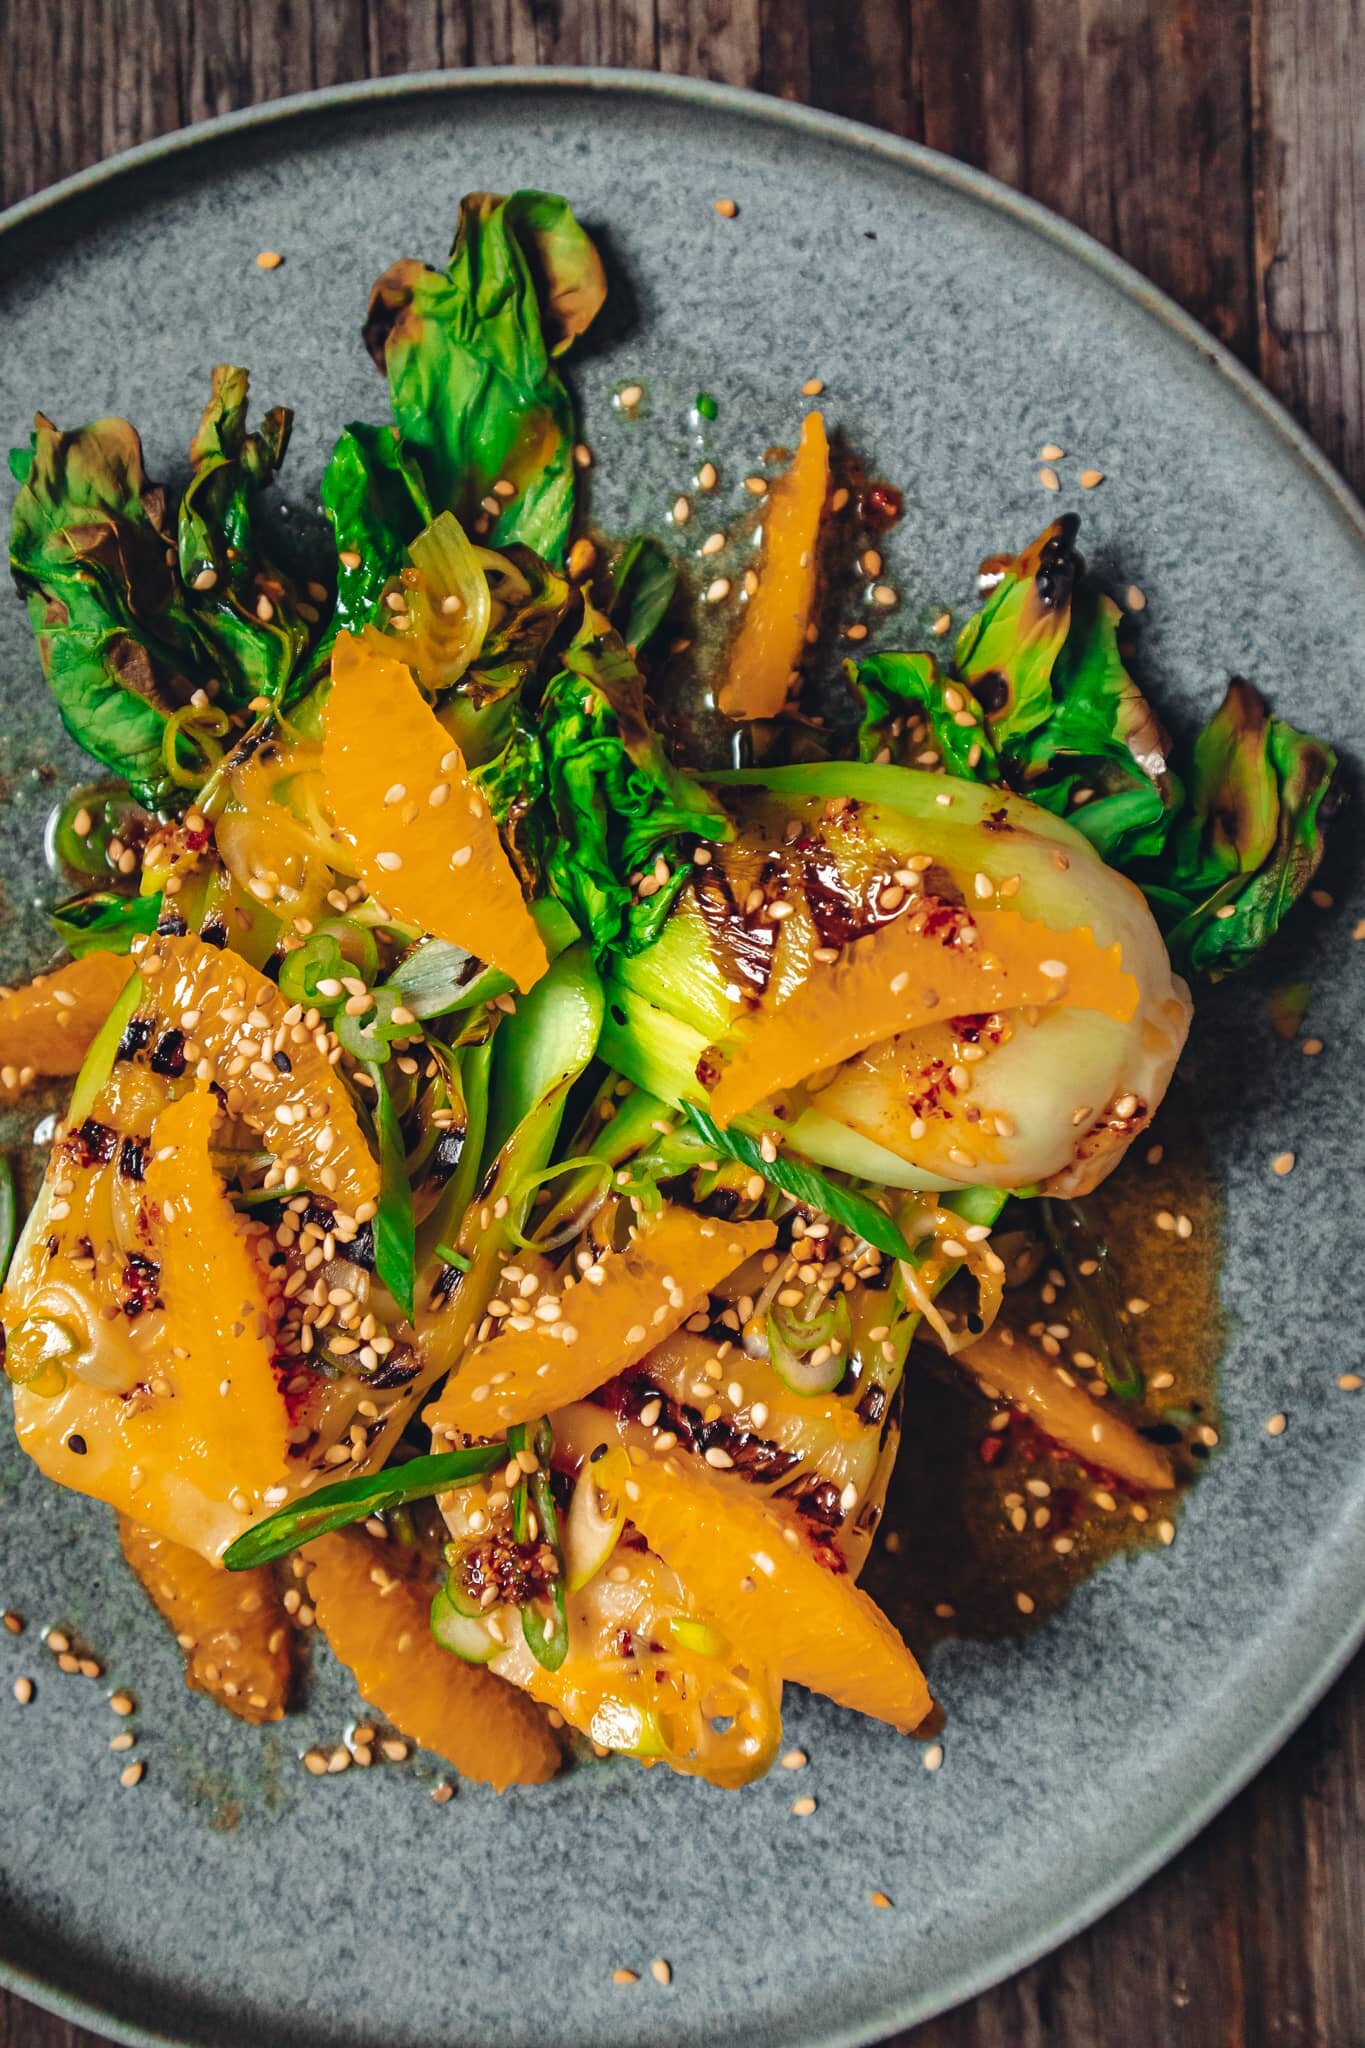 Grilled Bok Choy with Orange and Chili